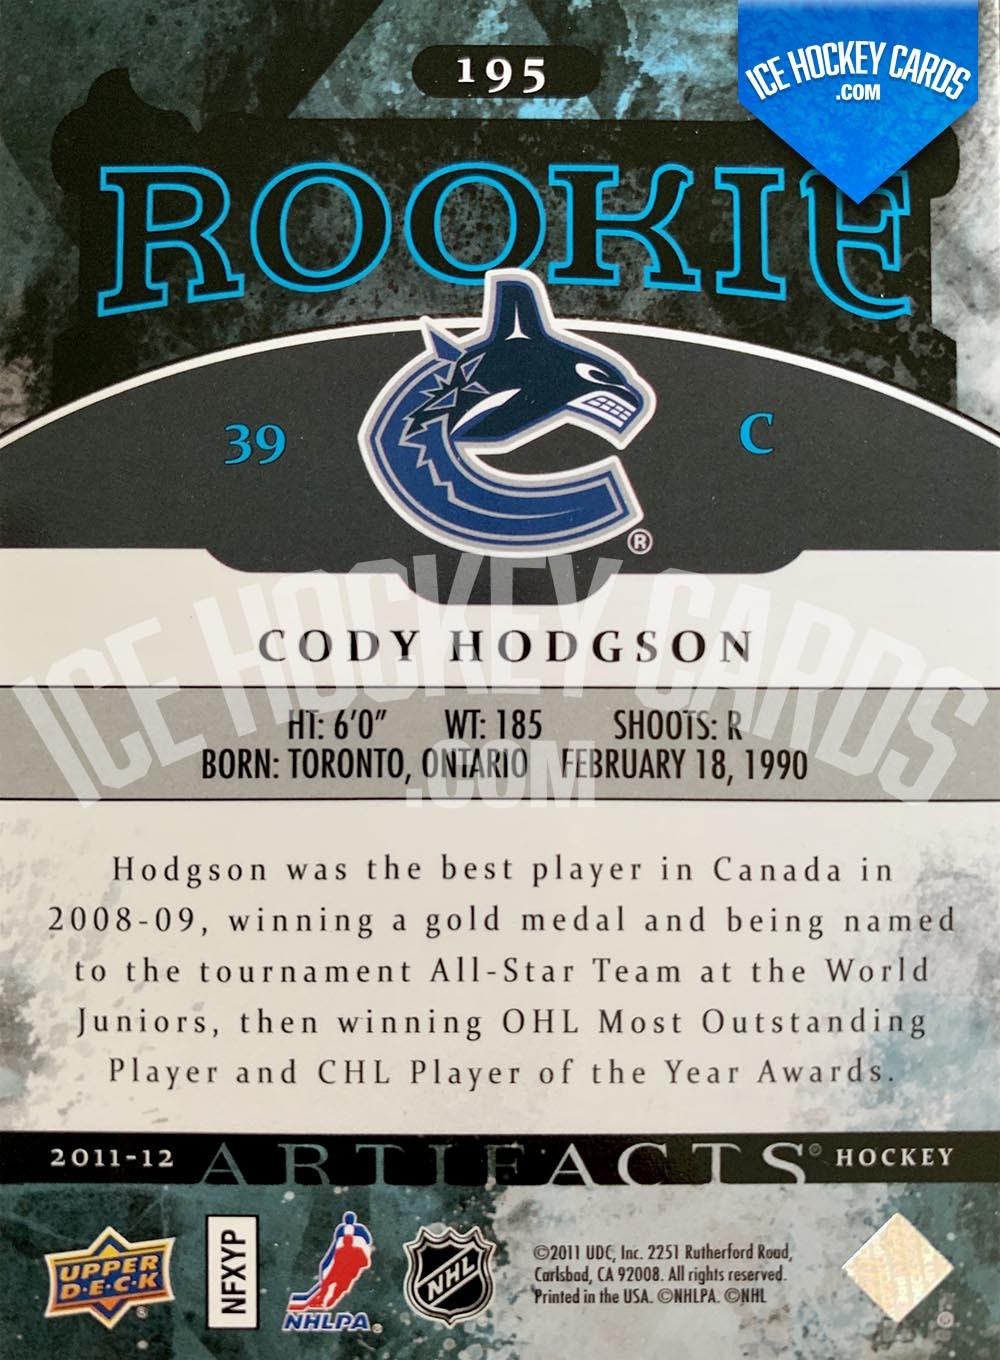 Upper Deck - Artifacts 2011-12 - Cody Hodgson Green Rookie Card # to 99 back